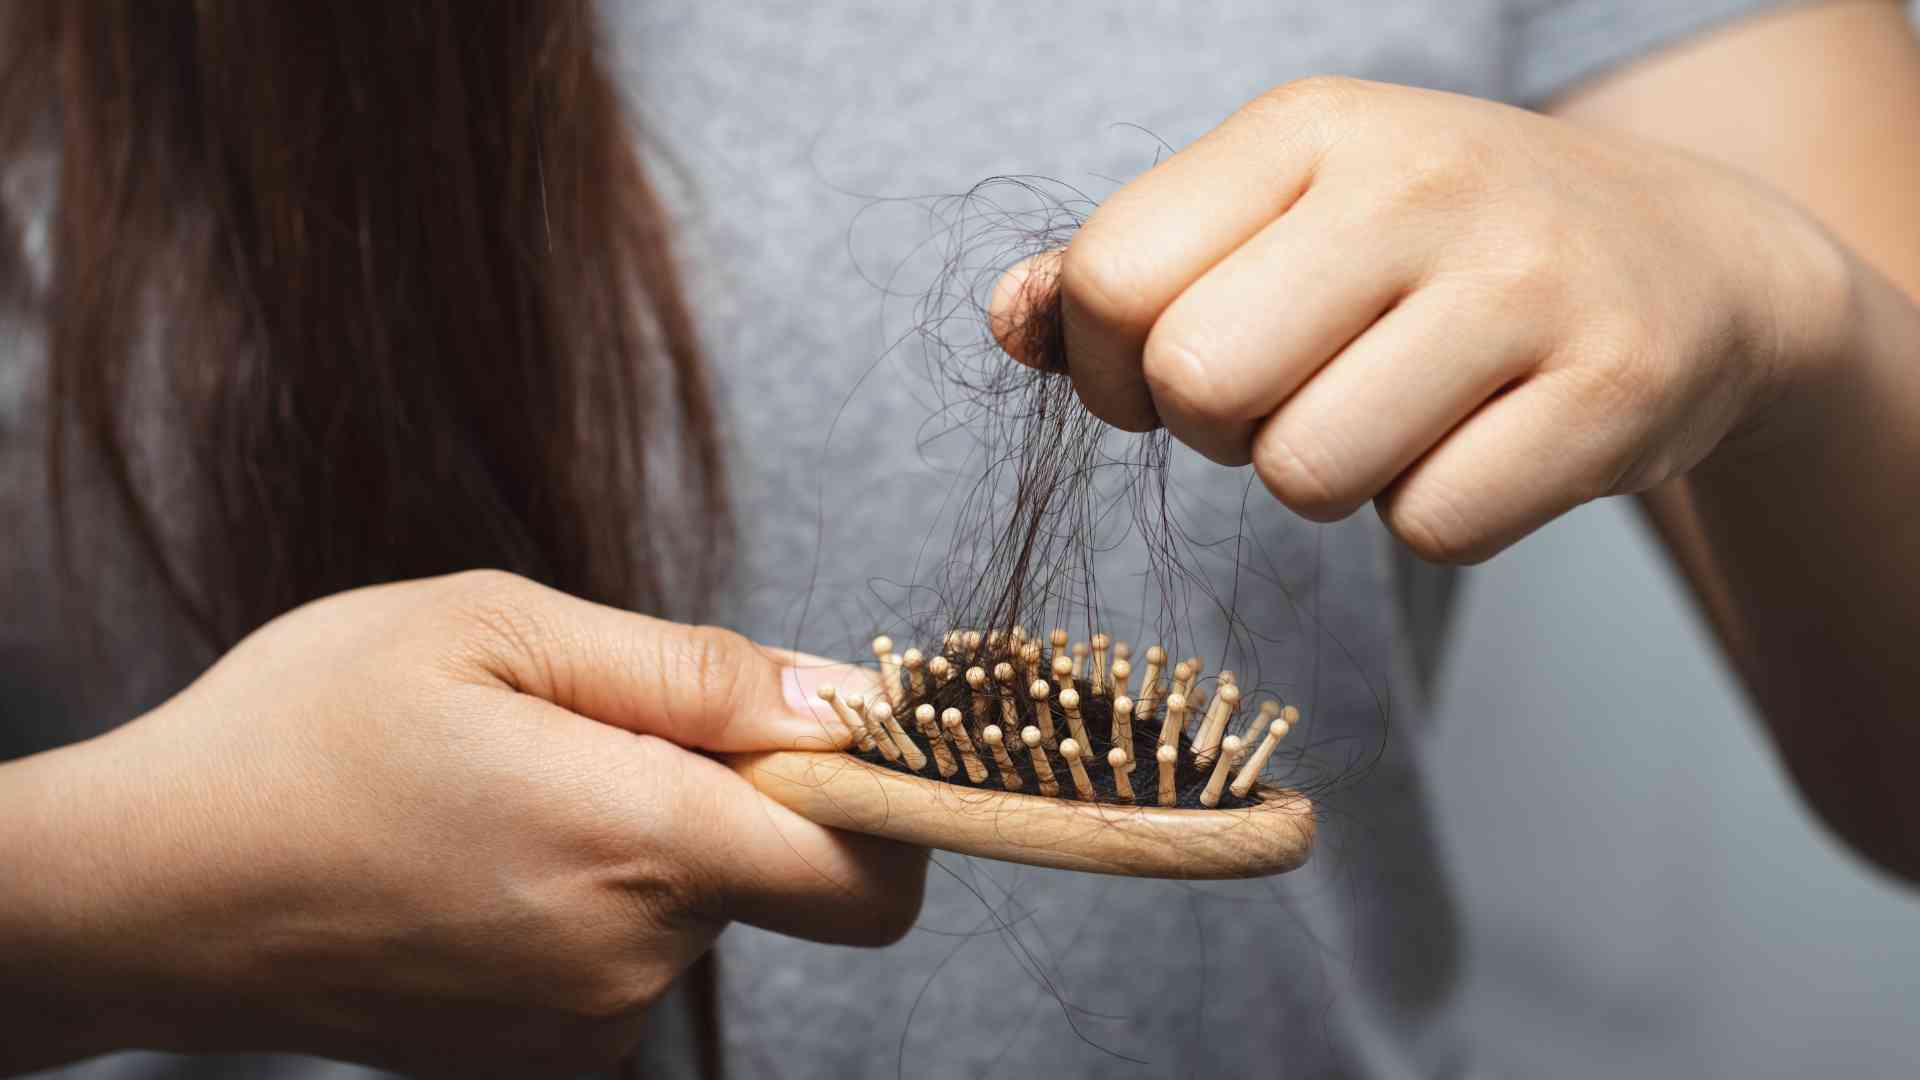 Can Hair Loss Symptom of Underlying Medical Condition?